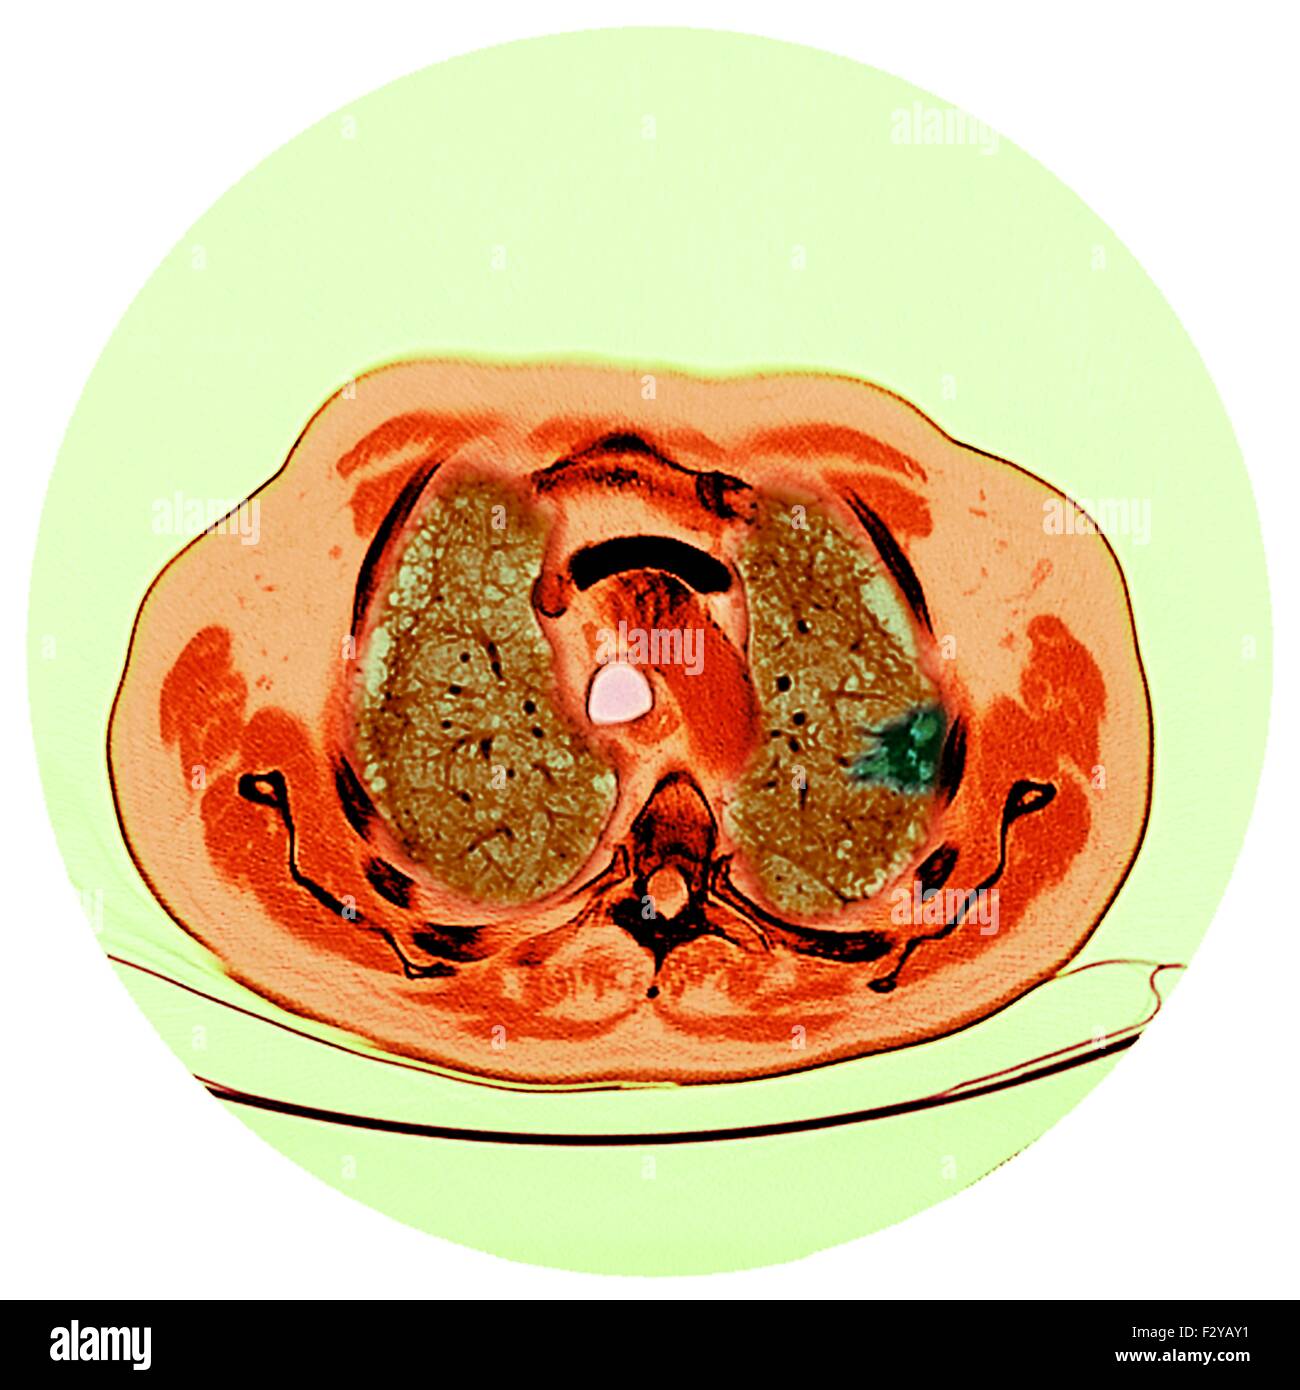 Lung cancer. Coloured computed tomography (CT) scan of a section through the chest of a 76-year-old male patient with a malignant (cancerous) tumour (dark, right) of the bronchus. The bronchi are the airways that carry air to the lungs and mouth. Stock Photo